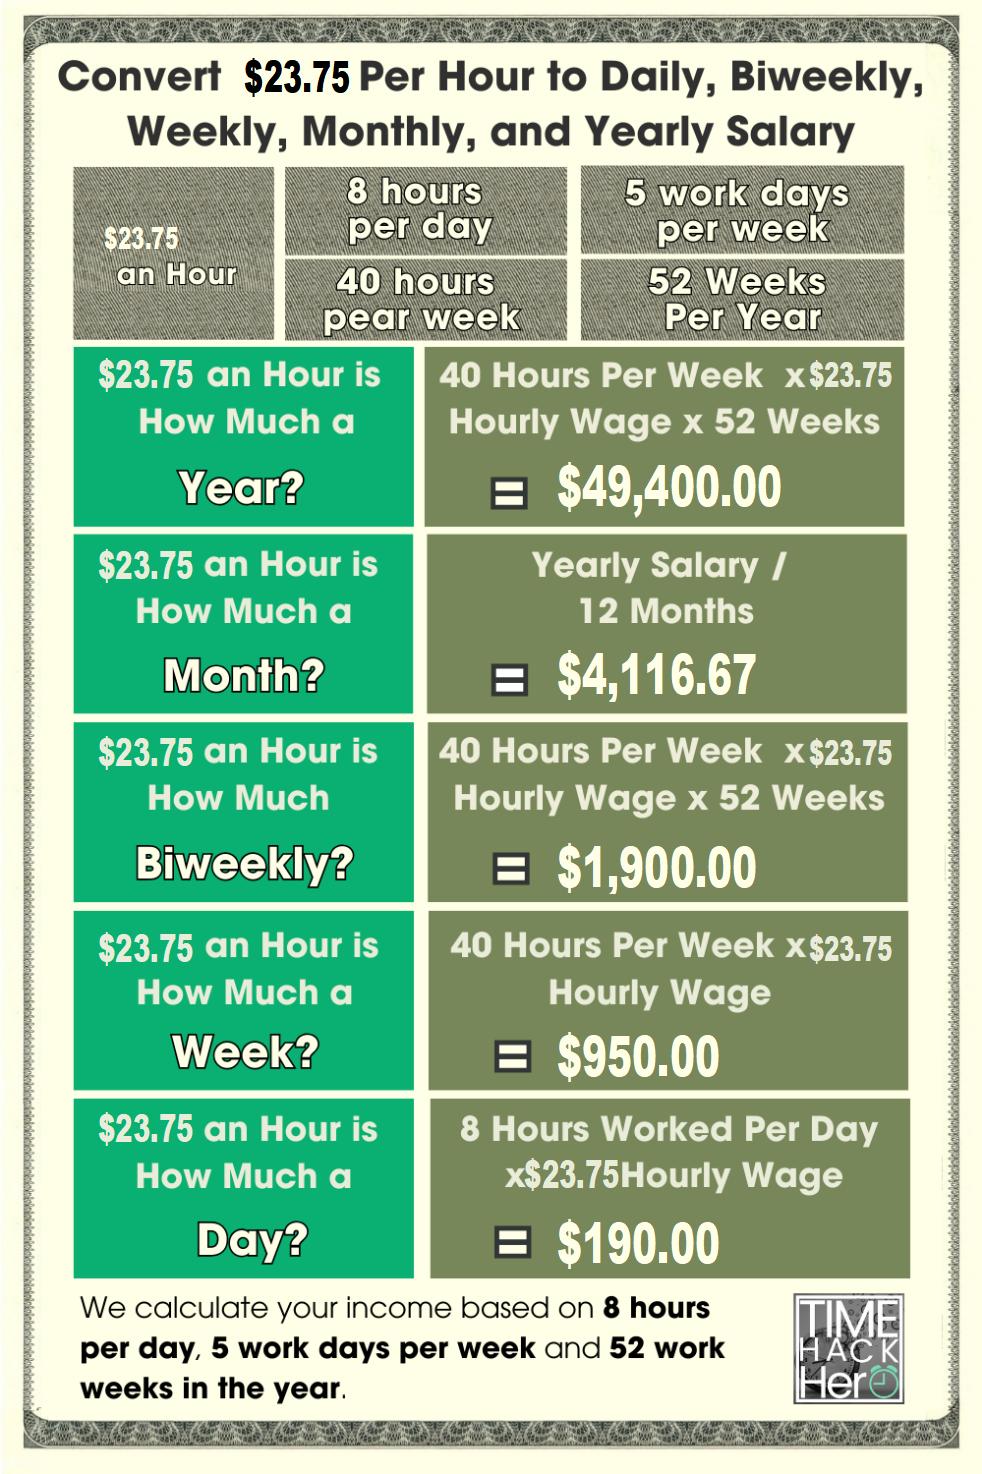 Convert $23.75 Per Hour to Weekly, Monthly, and Yearly Salary